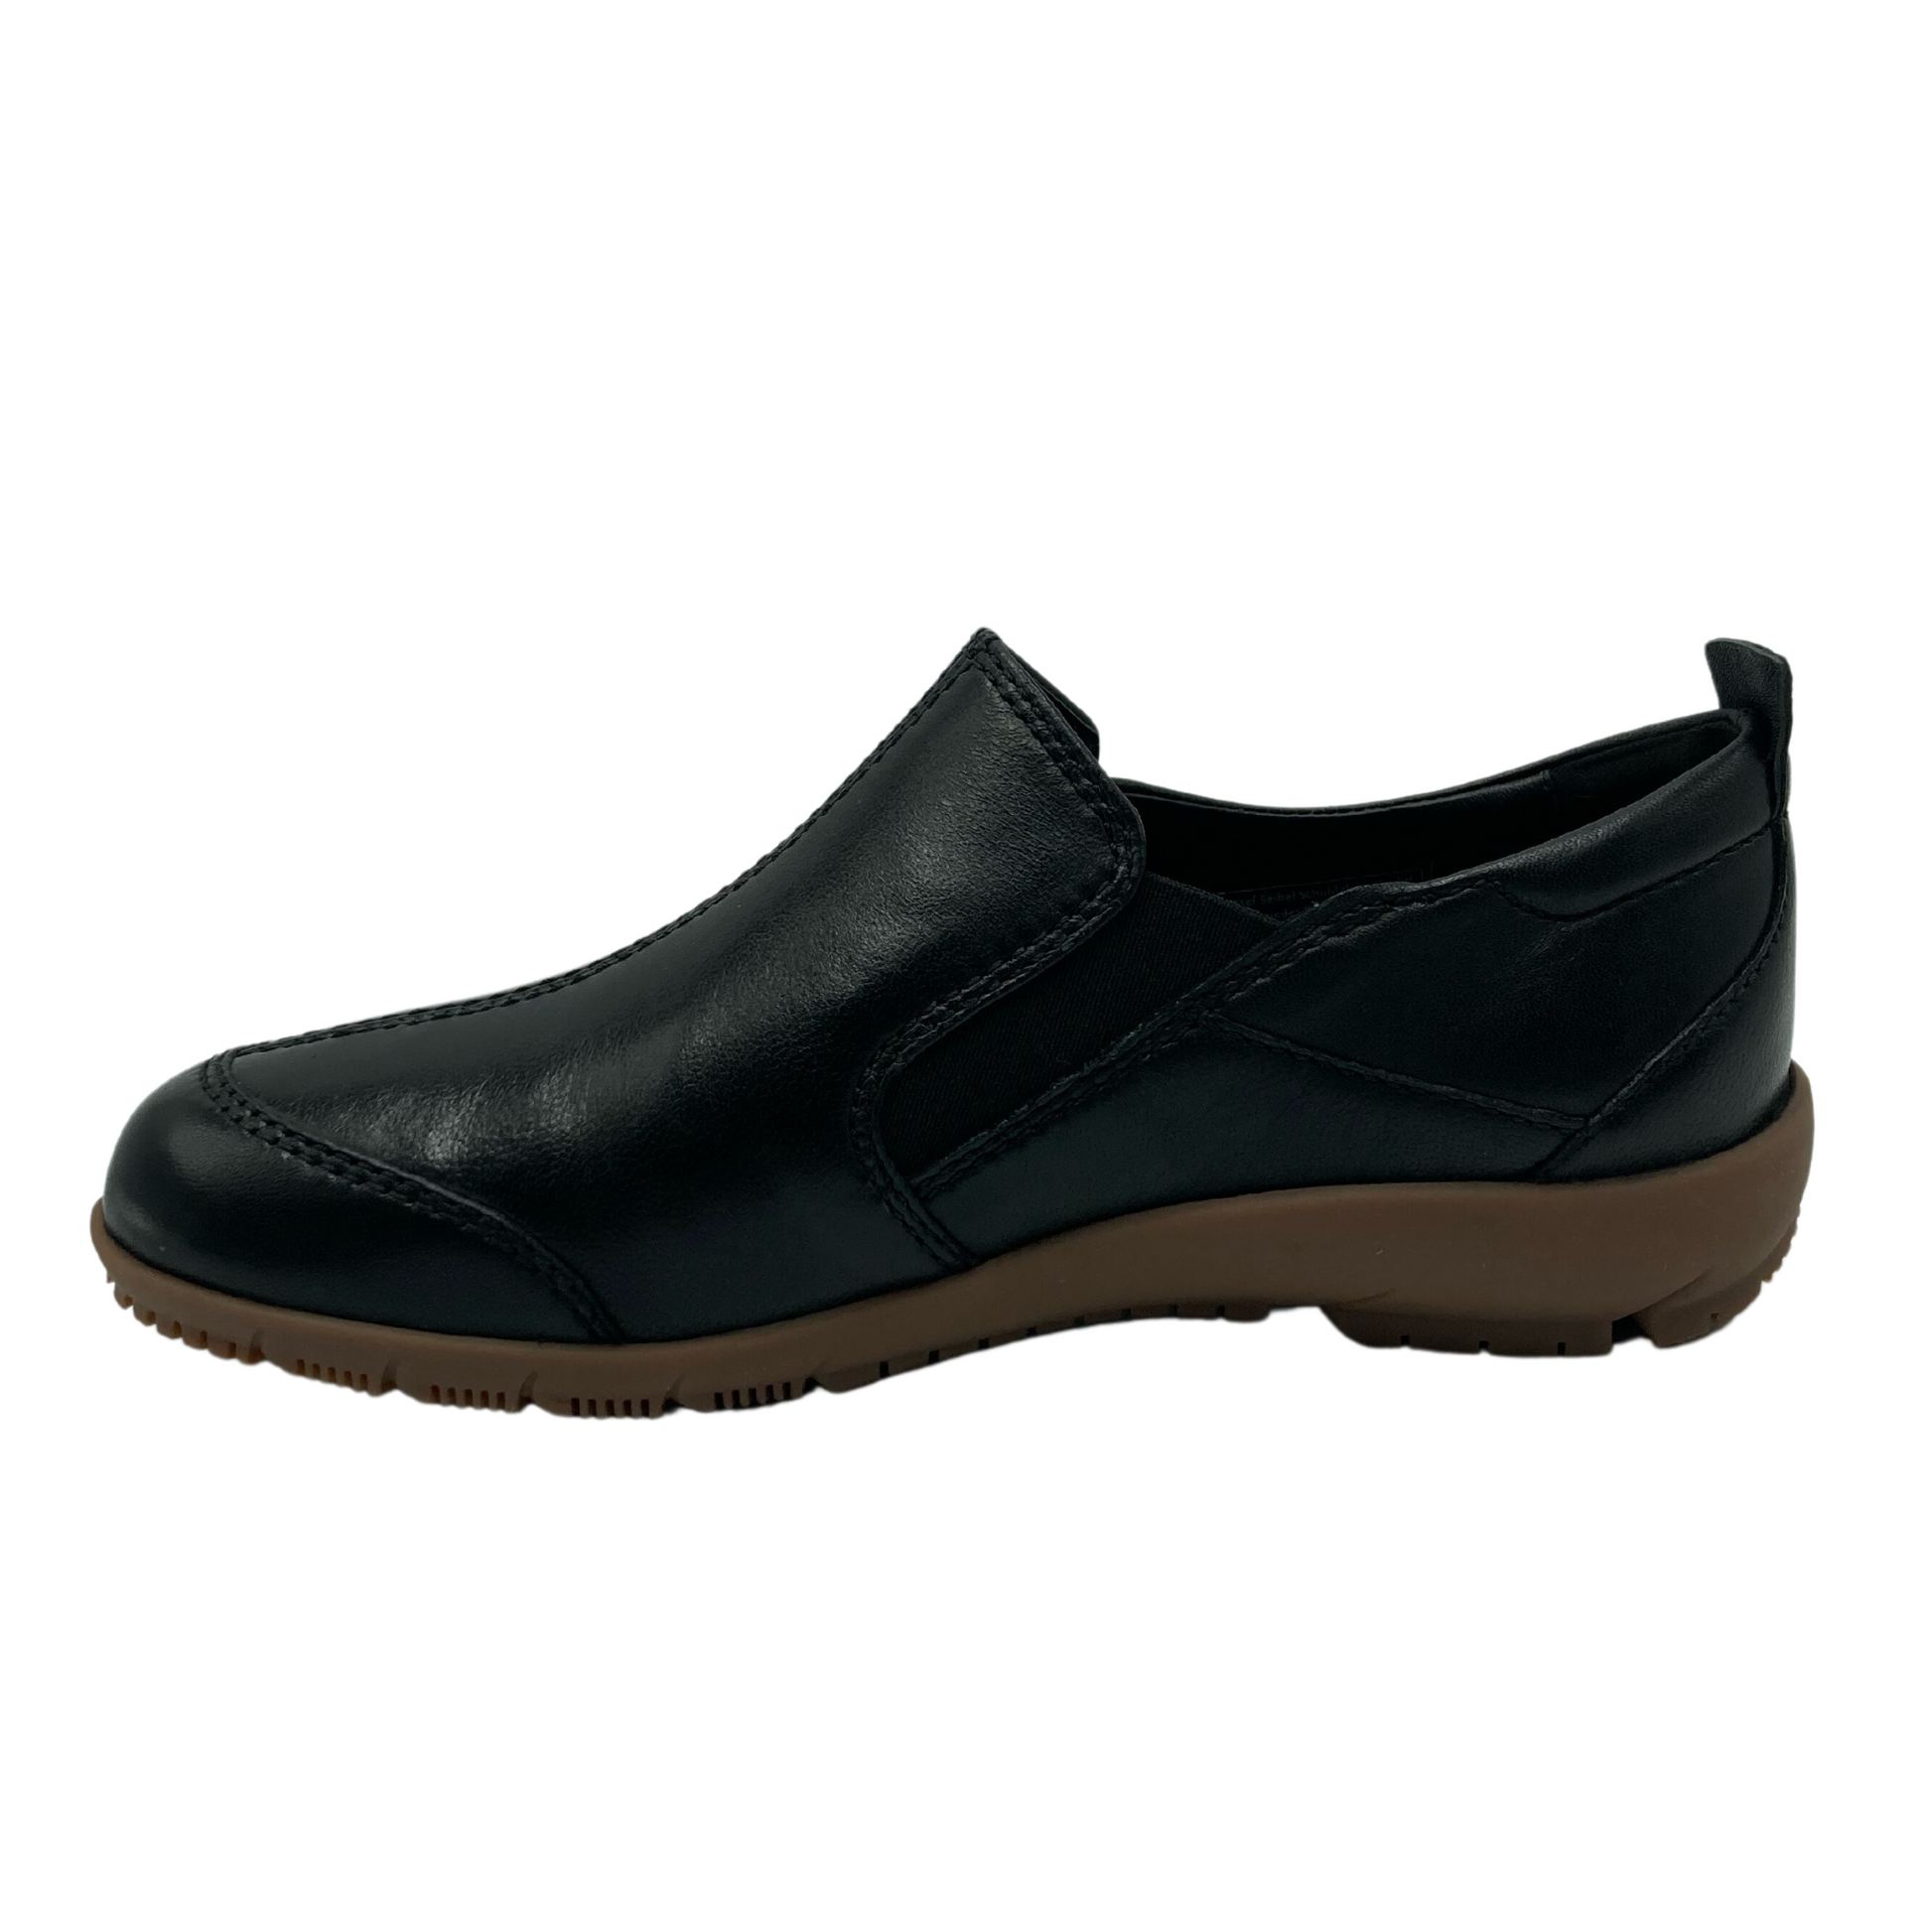 Left facing view of black leather shoe with elastic side gore and brown rubber outsole